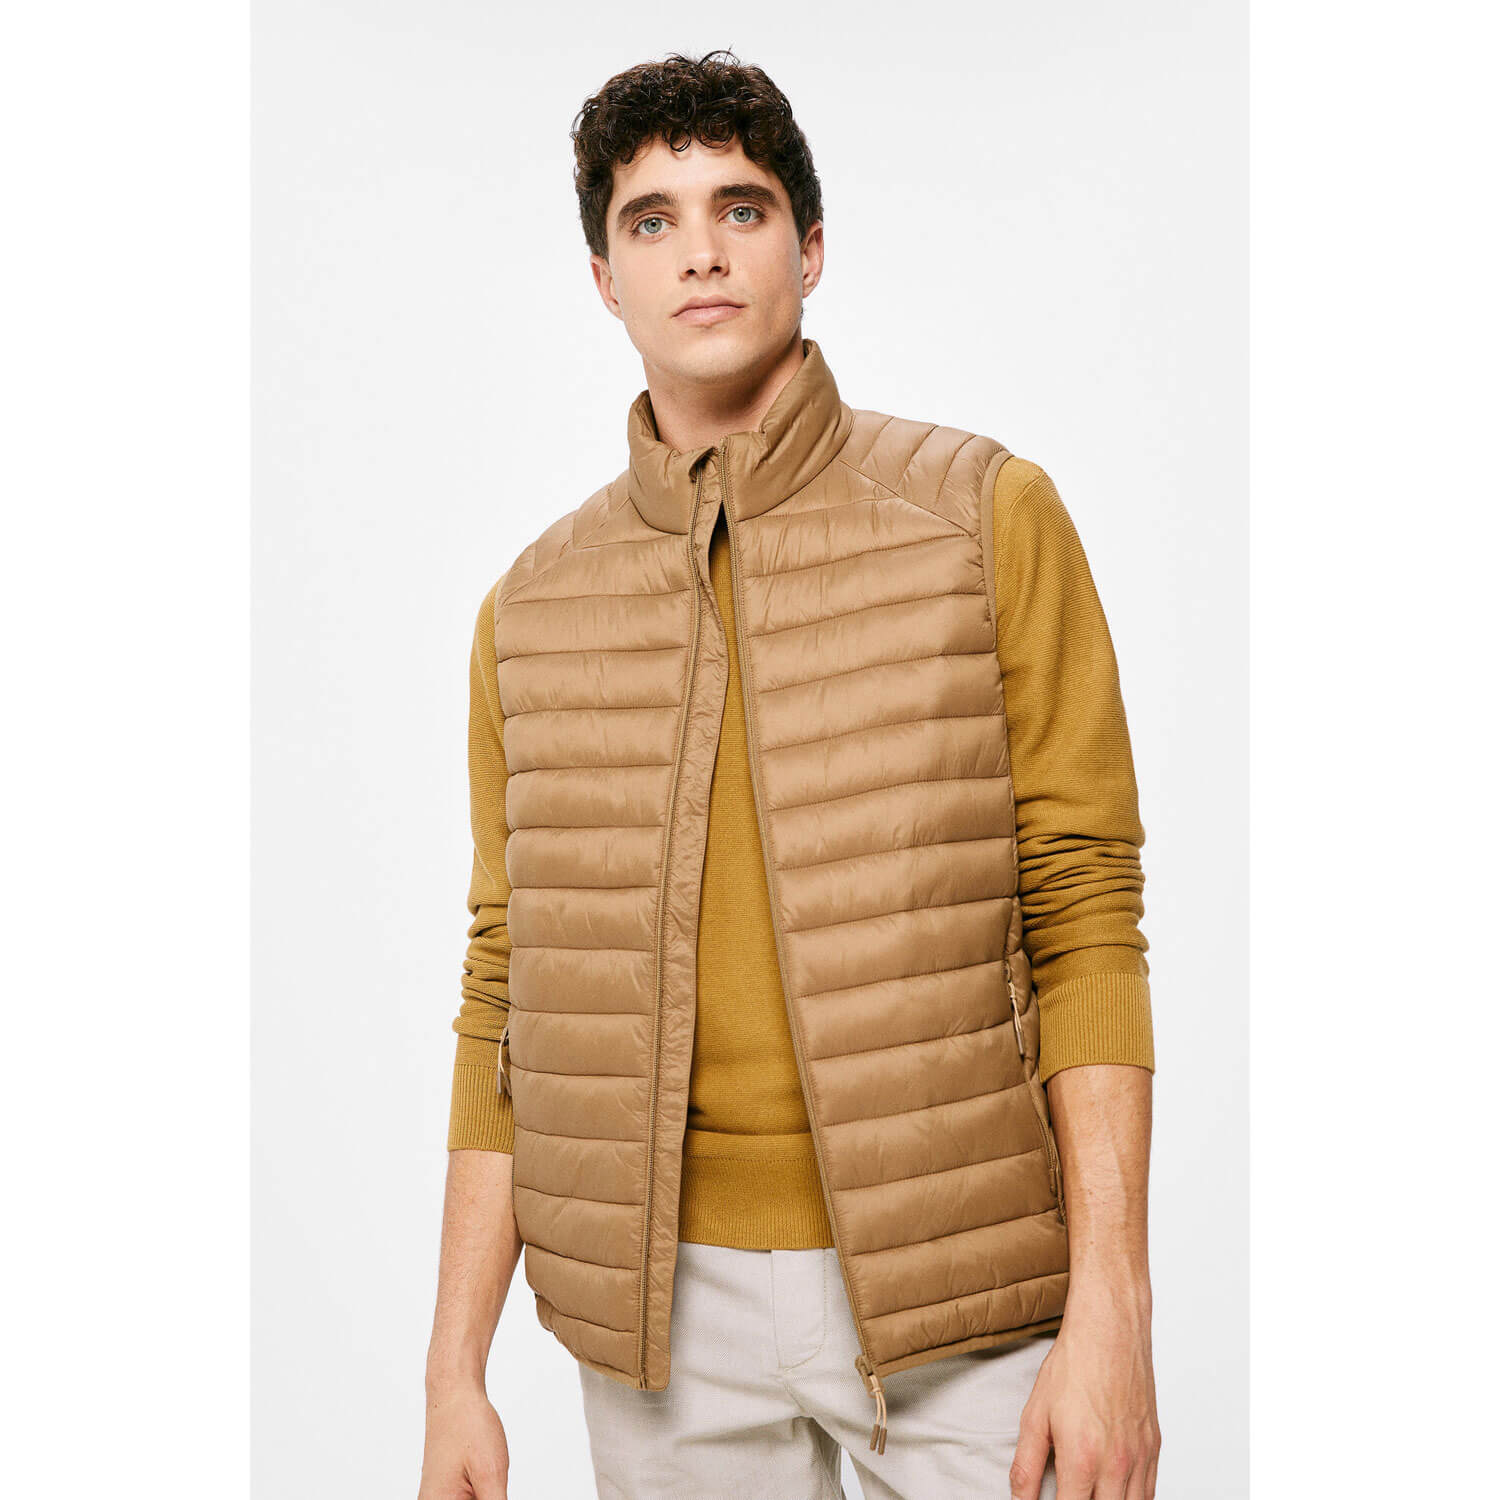 Springfield Nylon Casual Jacket - Beige/Camel 1 Shaws Department Stores